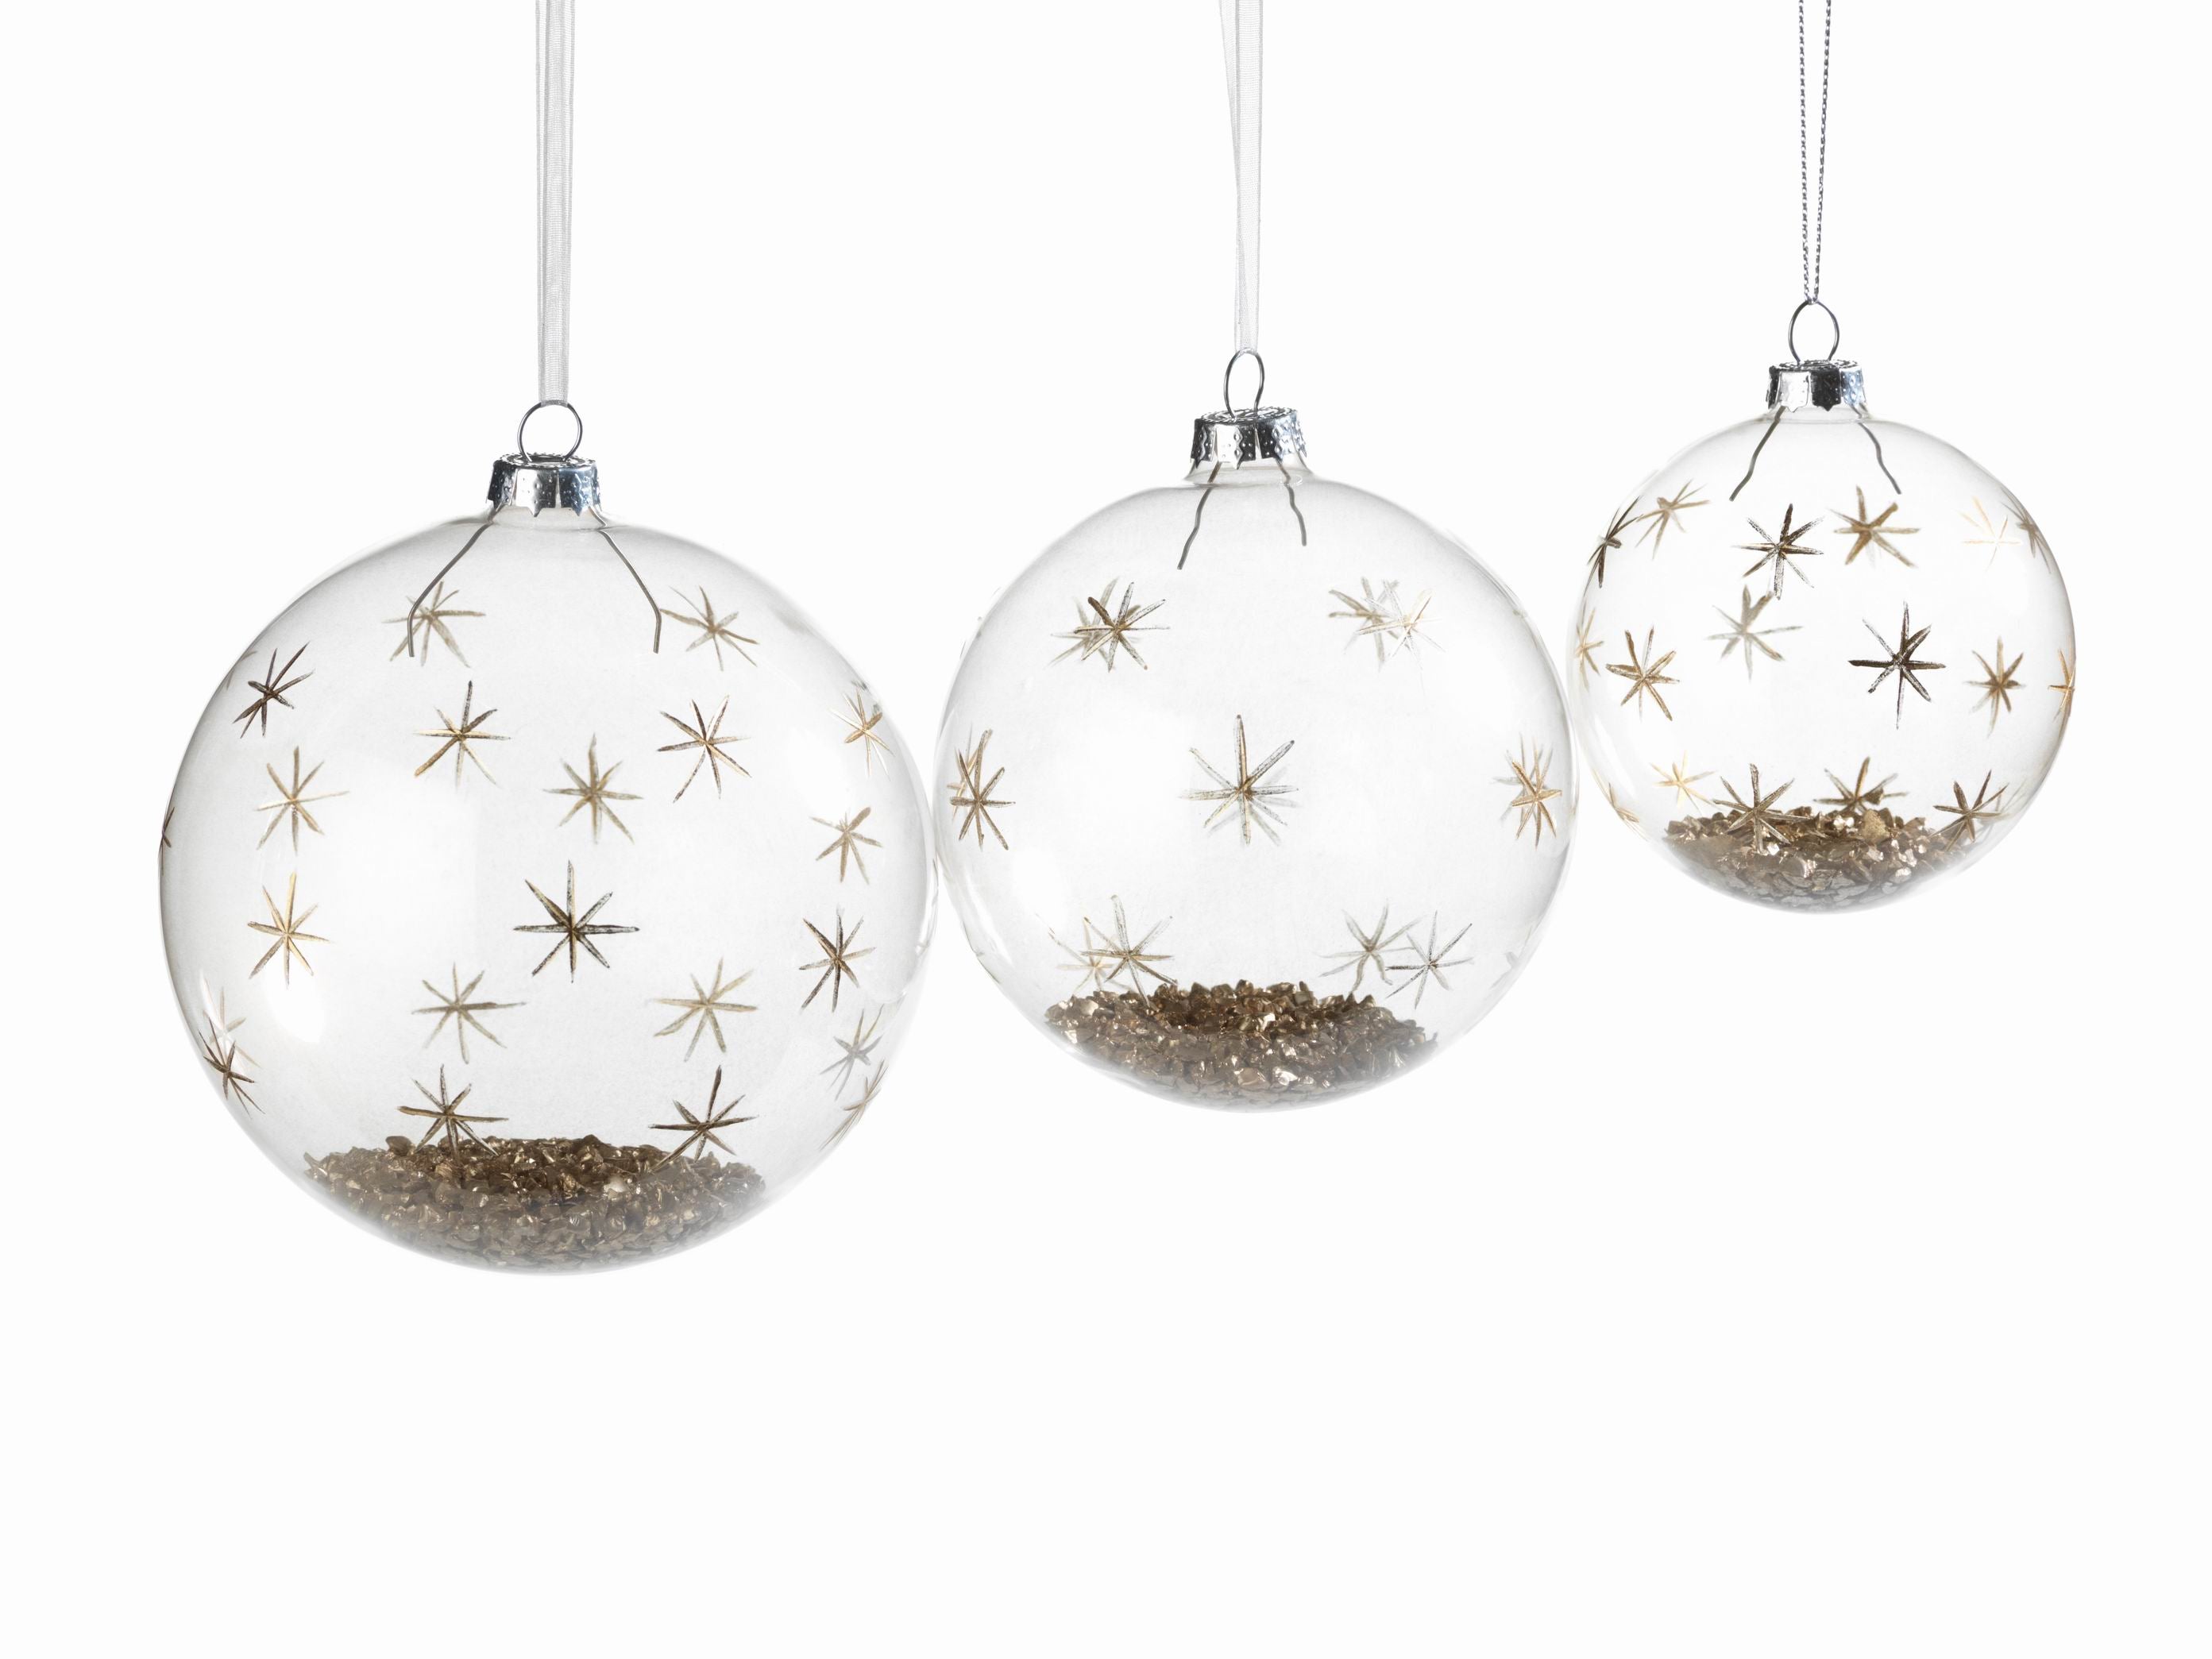 Clear Ball with Gold Confetti and Decor - CARLYLE AVENUE